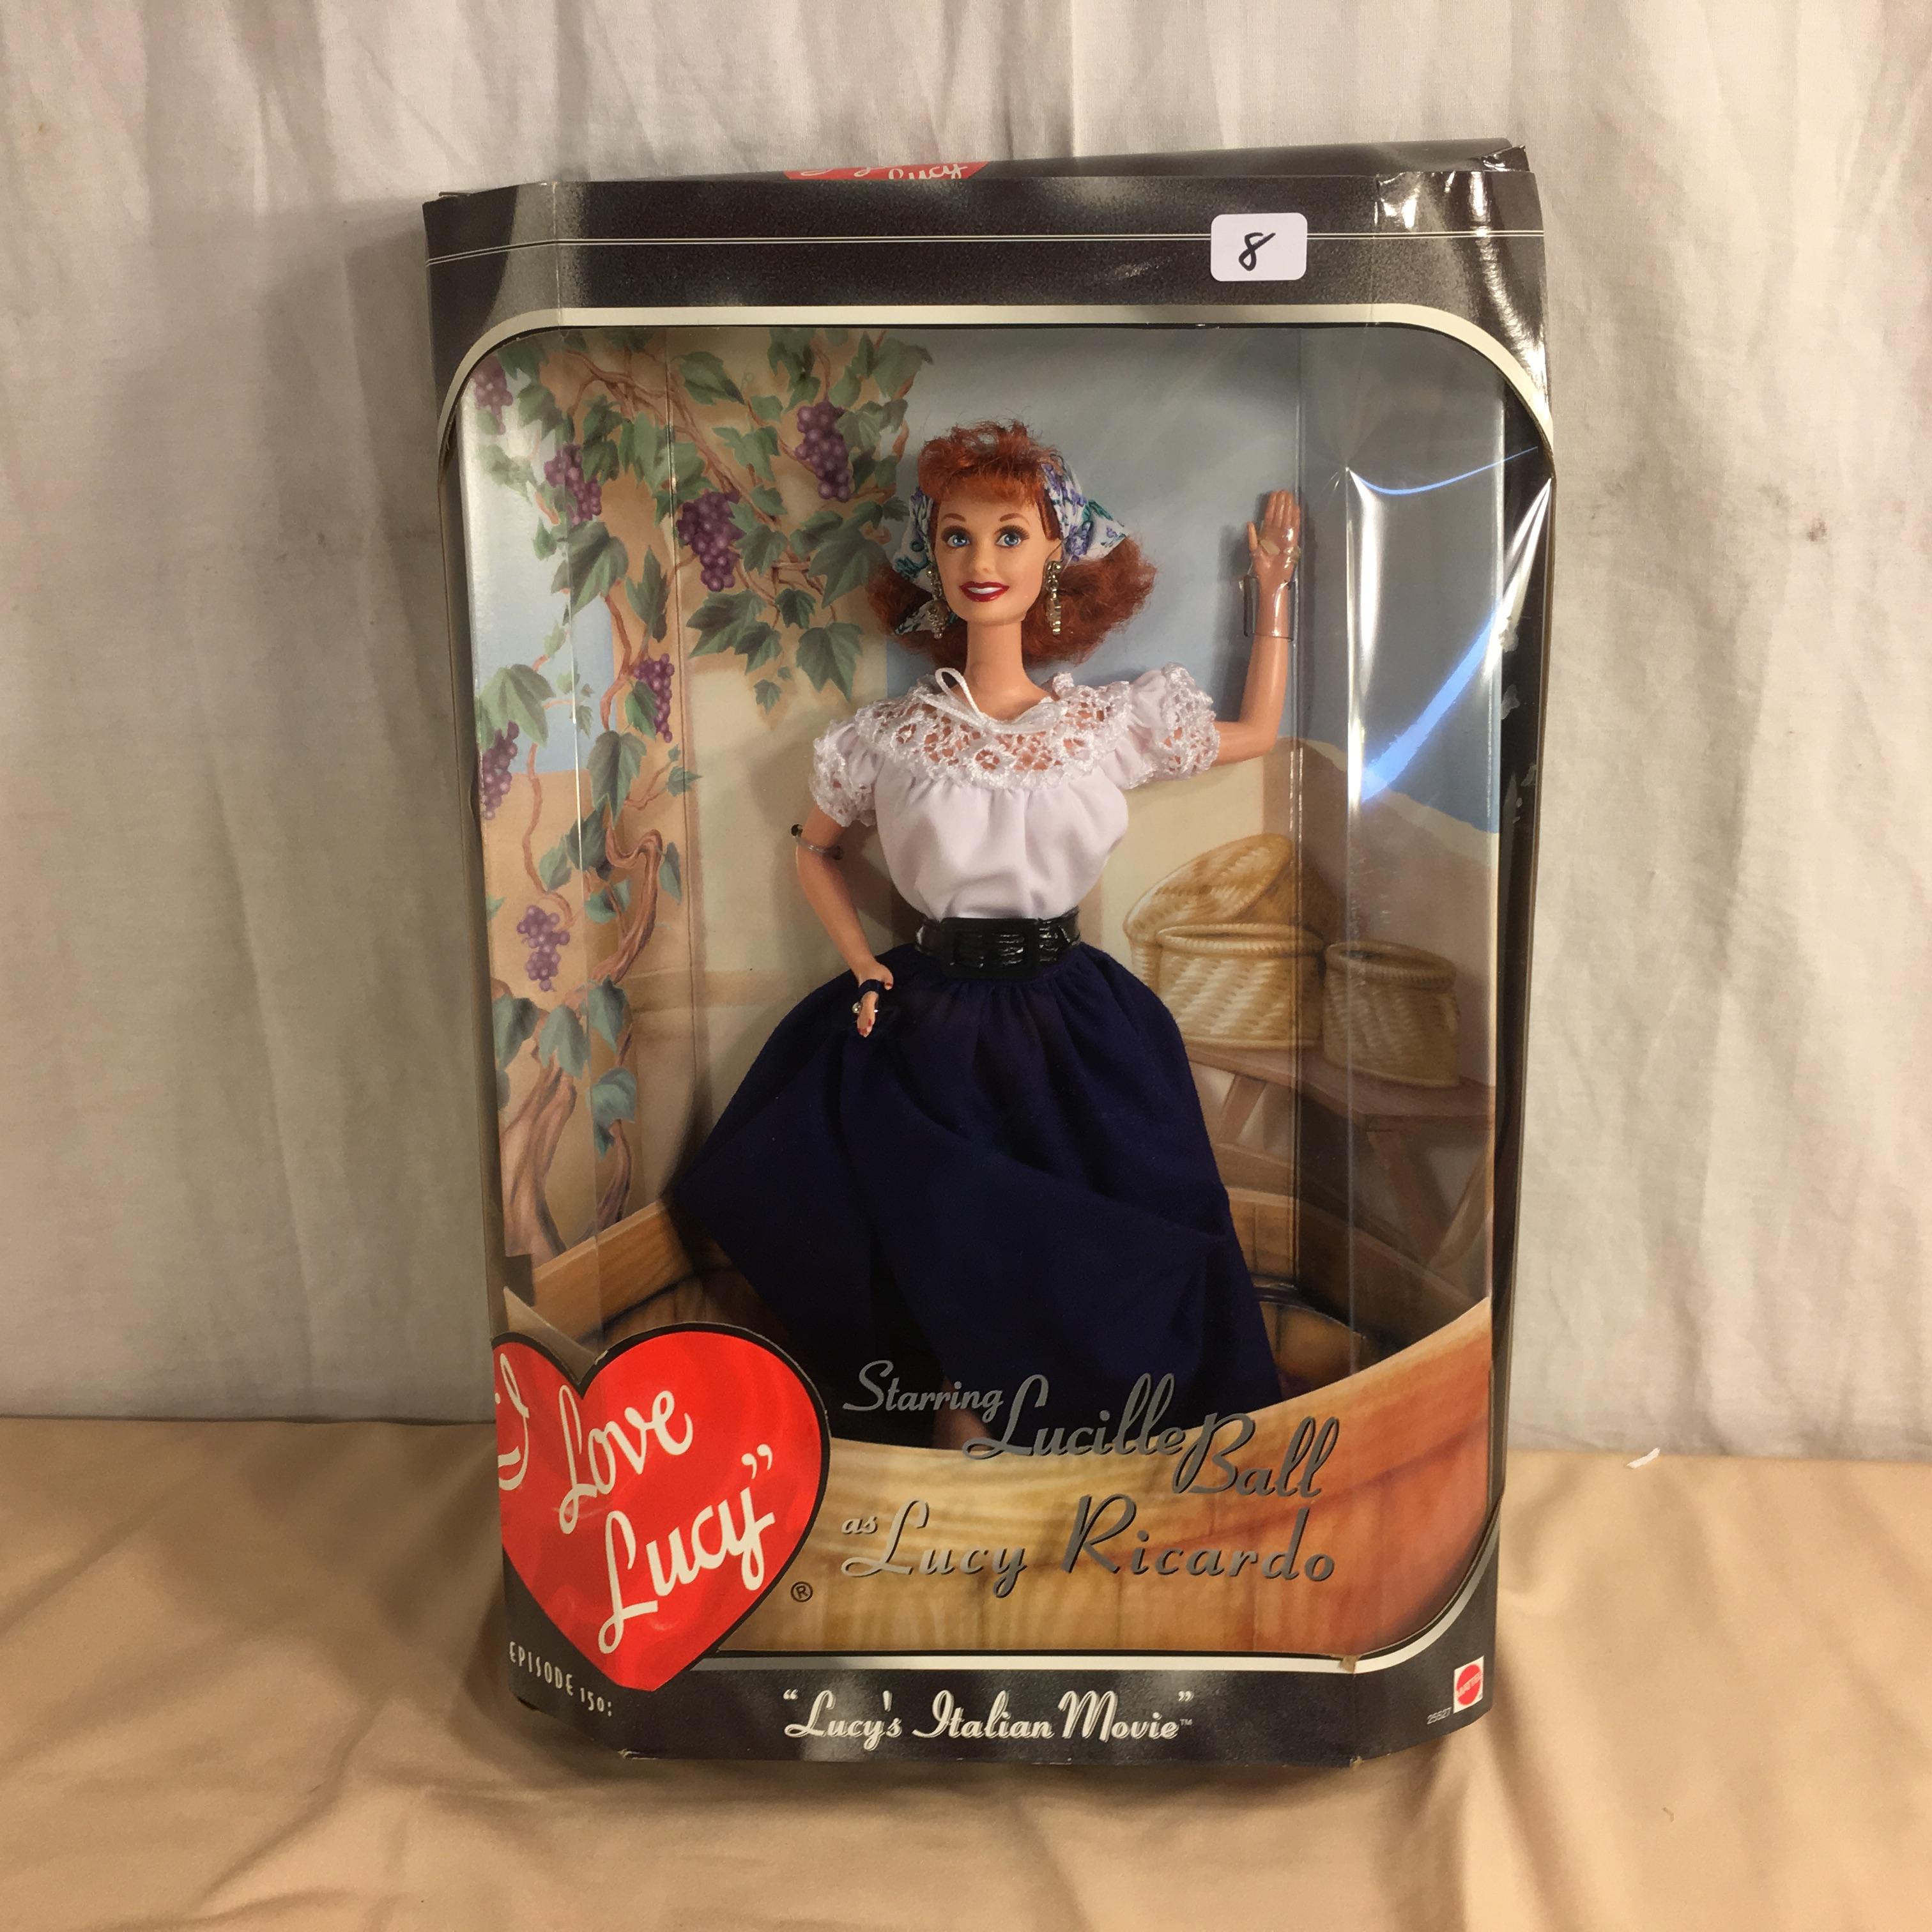 Collector Mattel Episode 150 Starring Lucille Ball as Lucy Ricard I Love Lucy Doll 13"T Box Damge